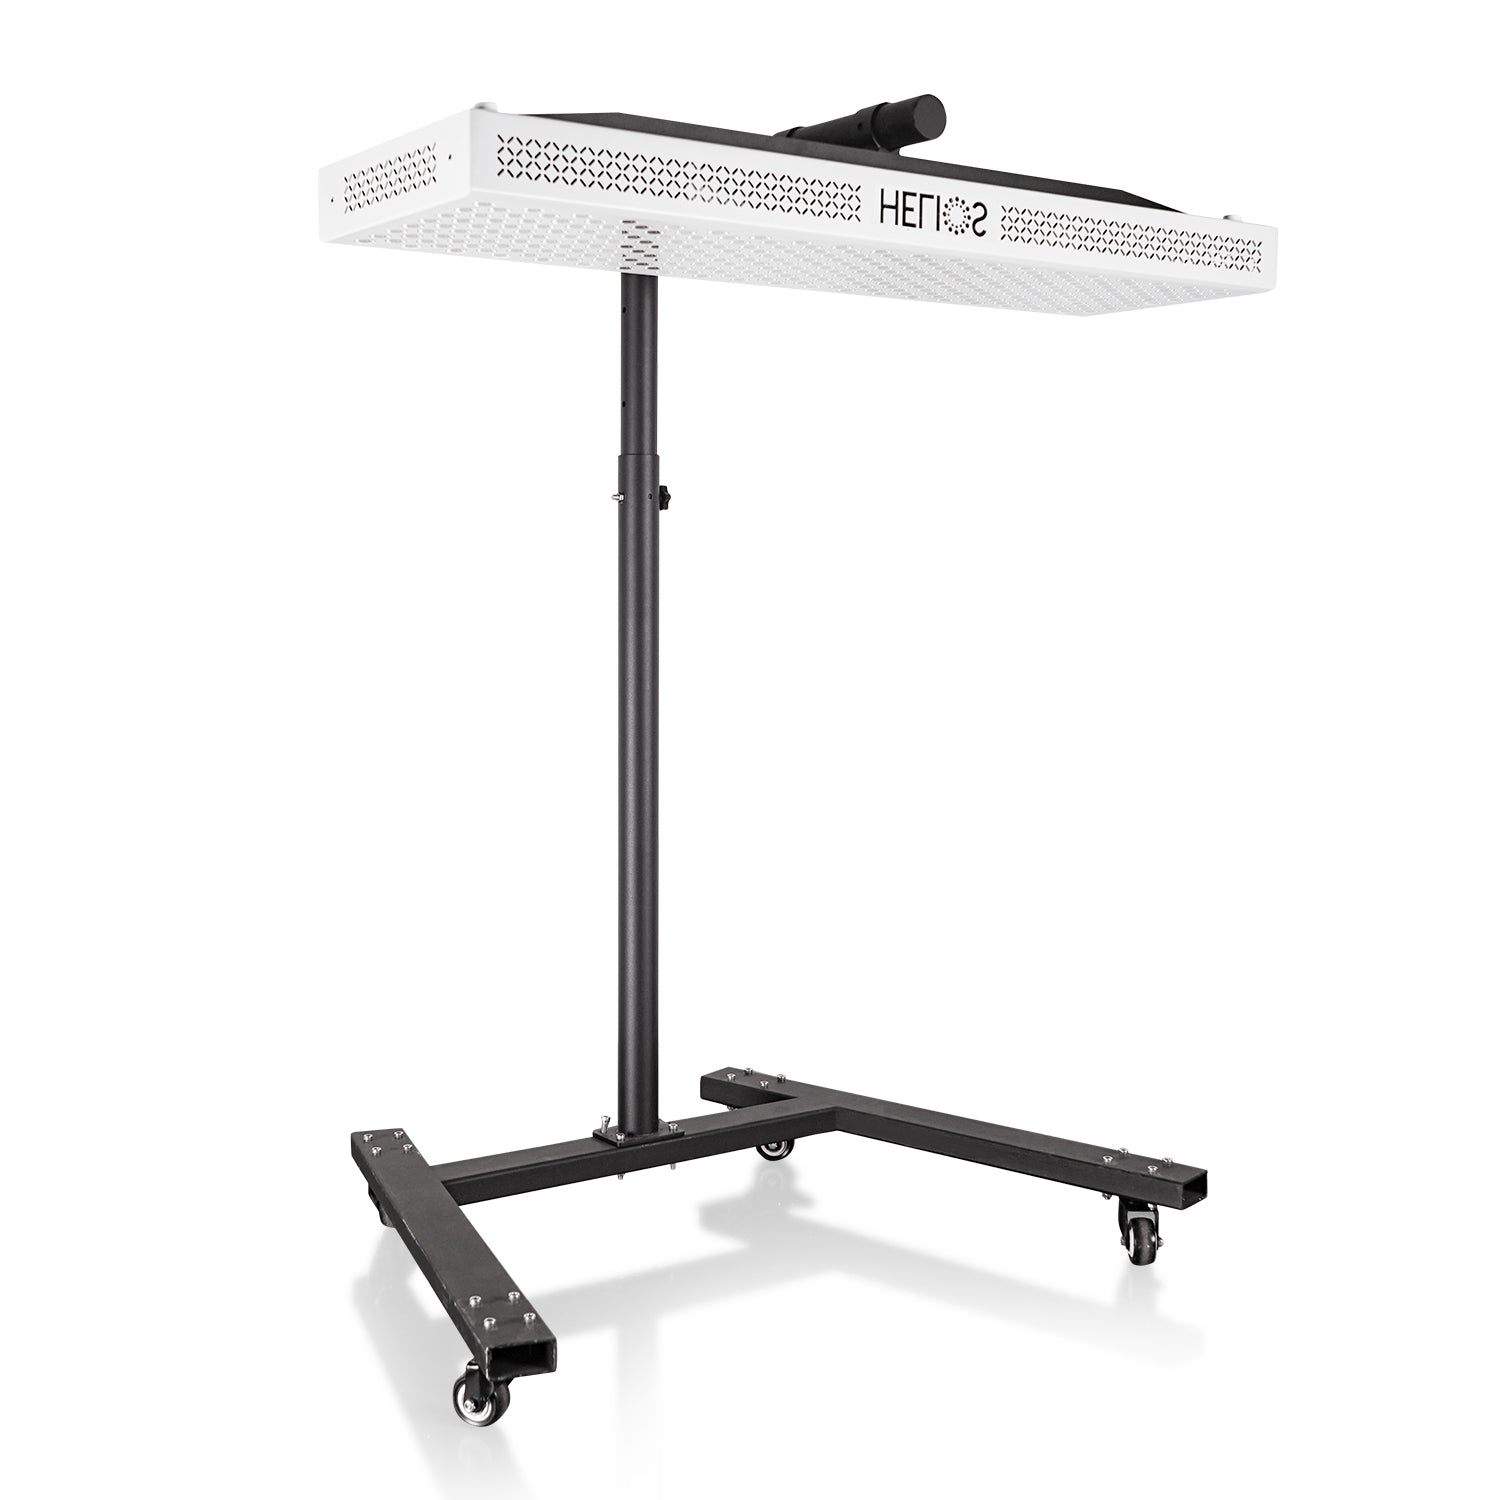 HELIOS 2 1500W Red Light Therapy Device + HELIOS Stand